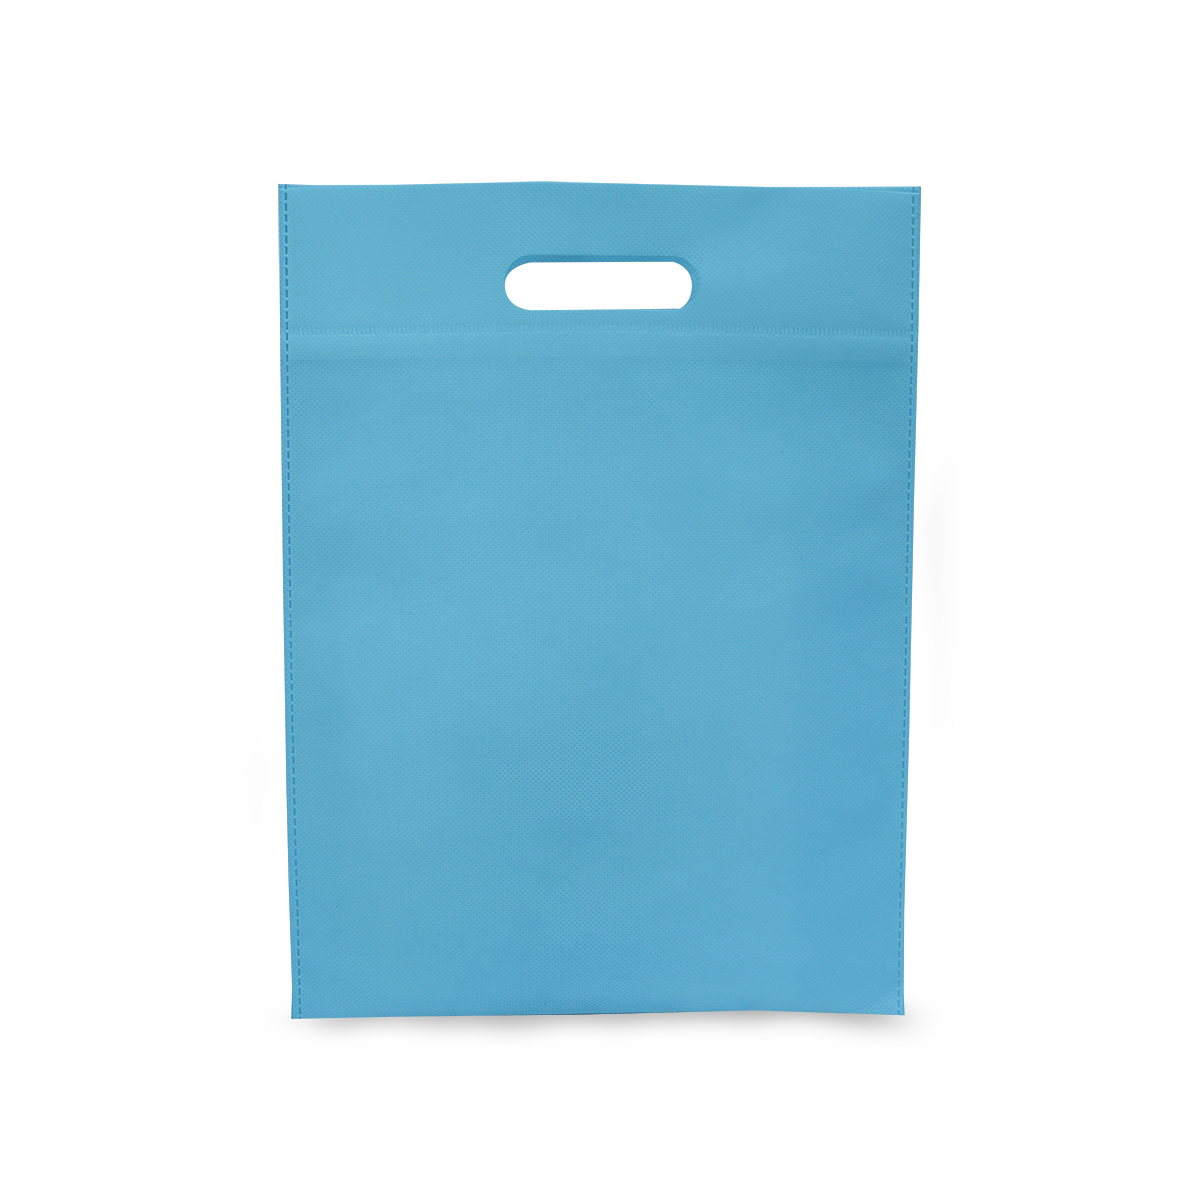 manufacturing-of-non-woven-bags-outlet-online-save-58-jlcatj-gob-mx